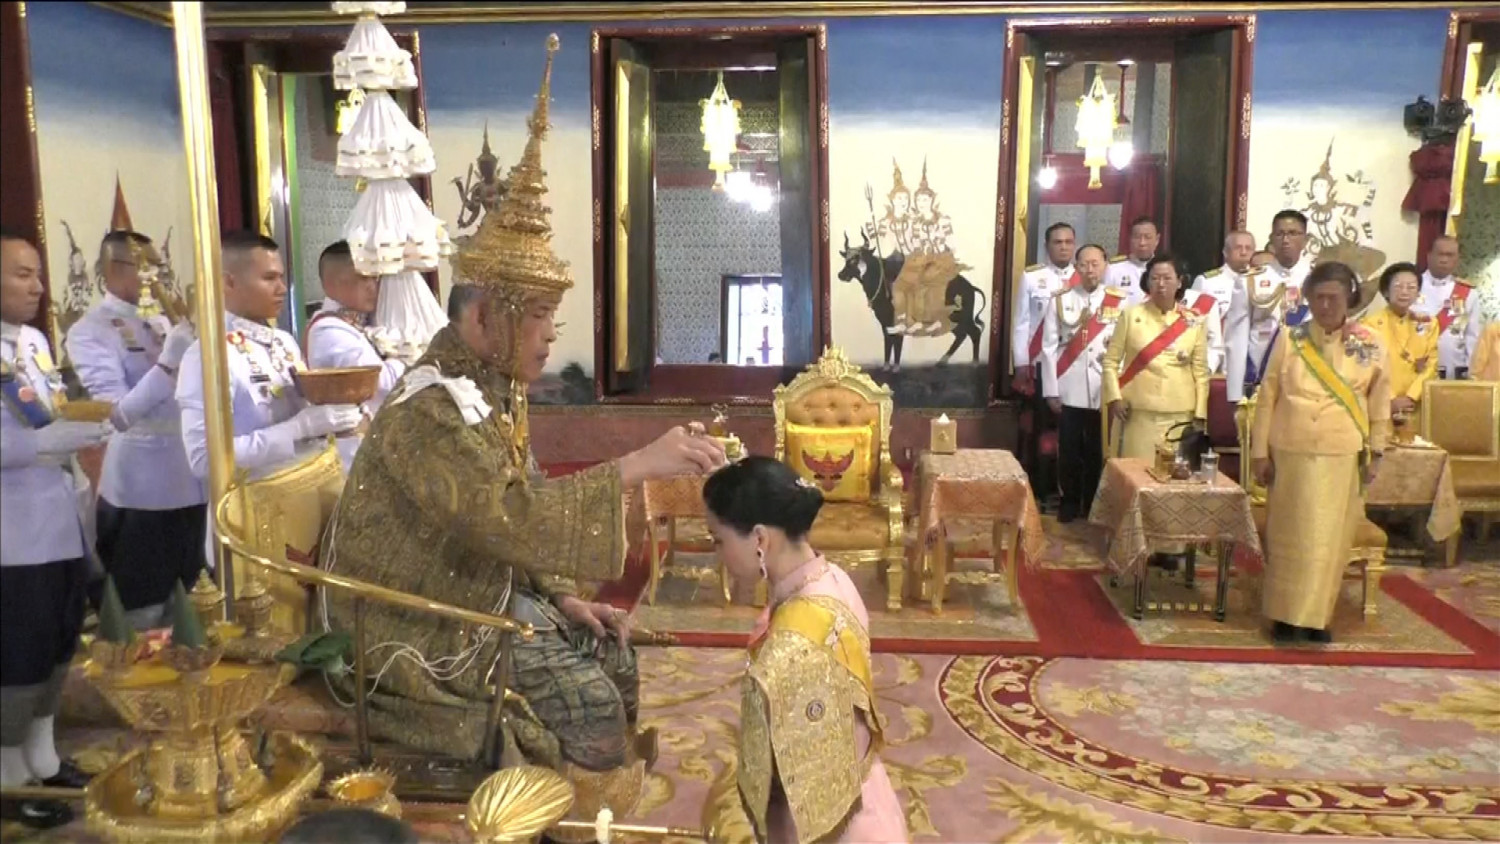 ‘I Shall Reign in Righteousness’: Thailand Crowns King in Ornate Ceremonies